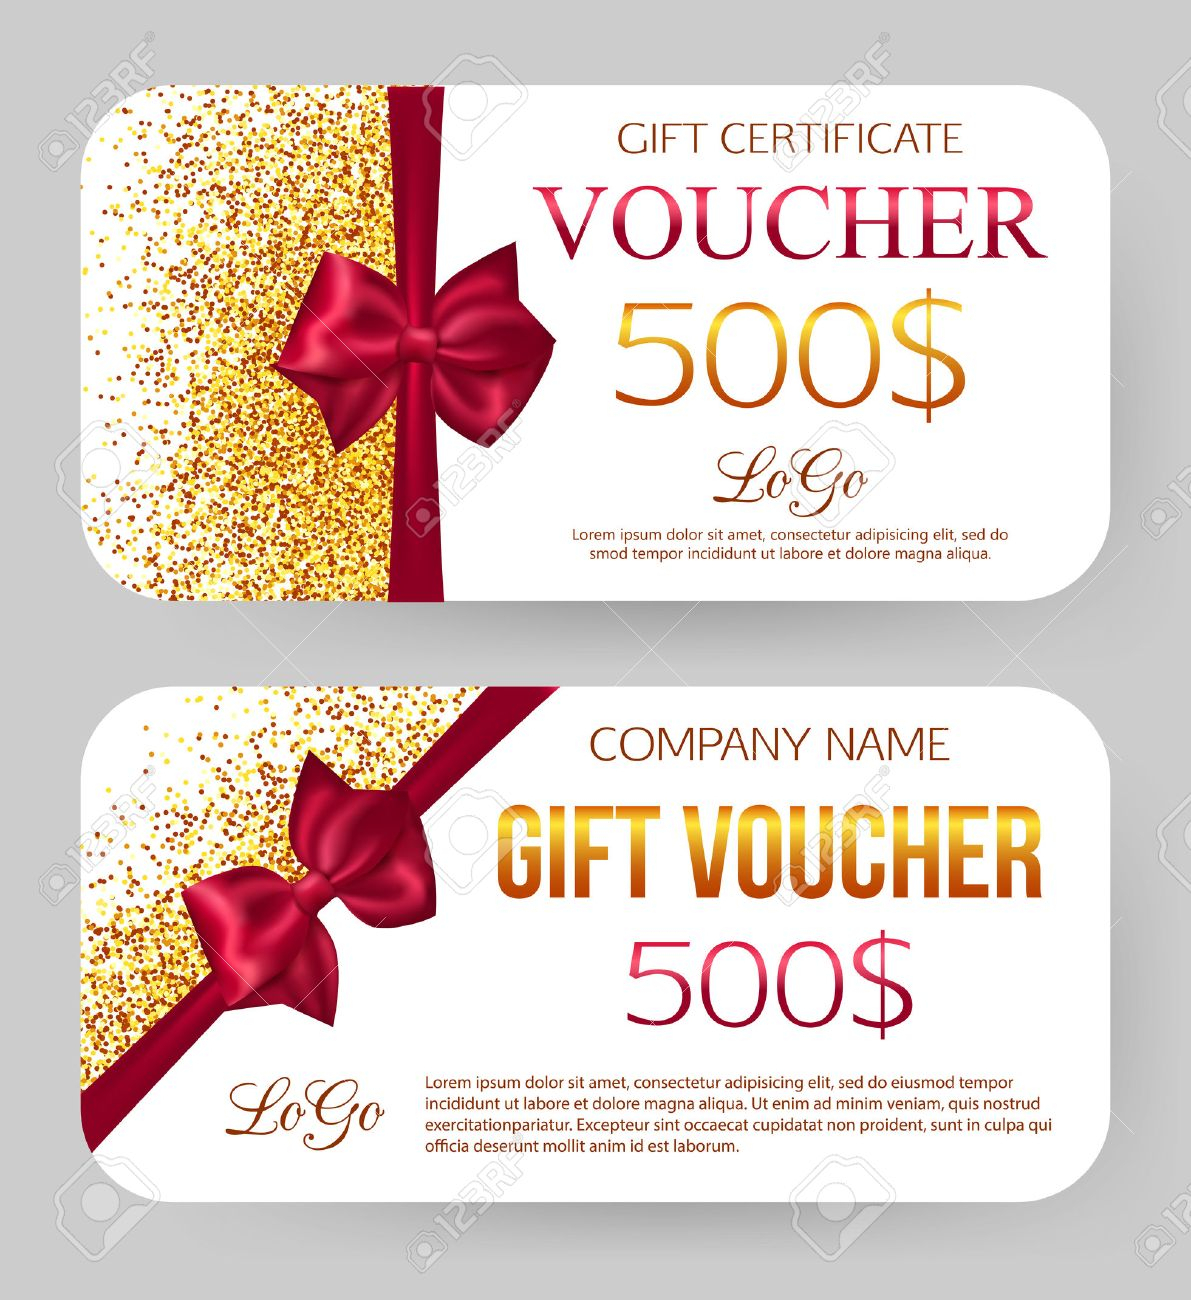 Gift Voucher Template. Golden Design For Gift Certificate Coupon With Magazine Subscription Gift Certificate Template